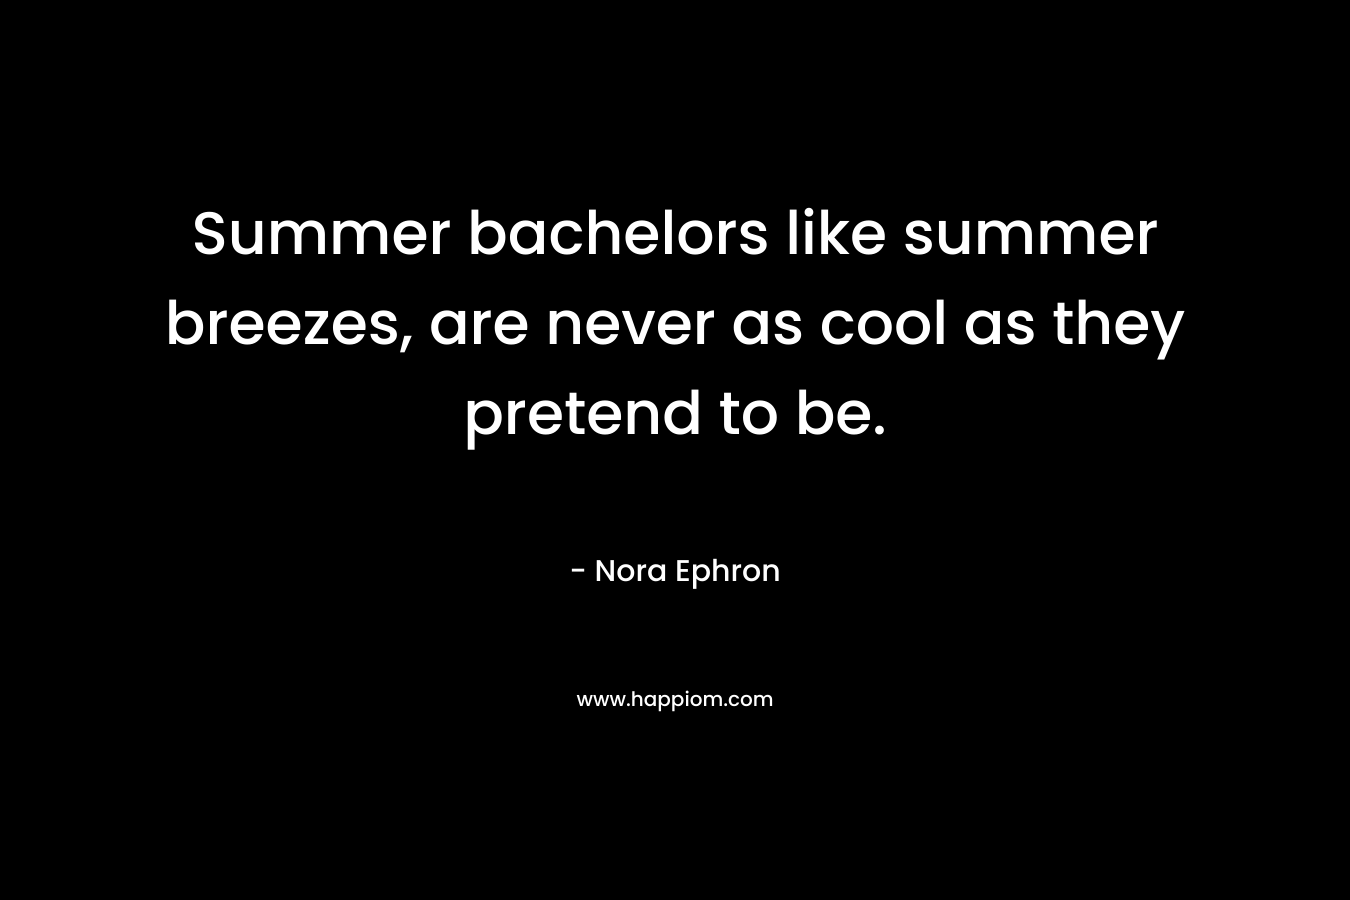 Summer bachelors like summer breezes, are never as cool as they pretend to be.